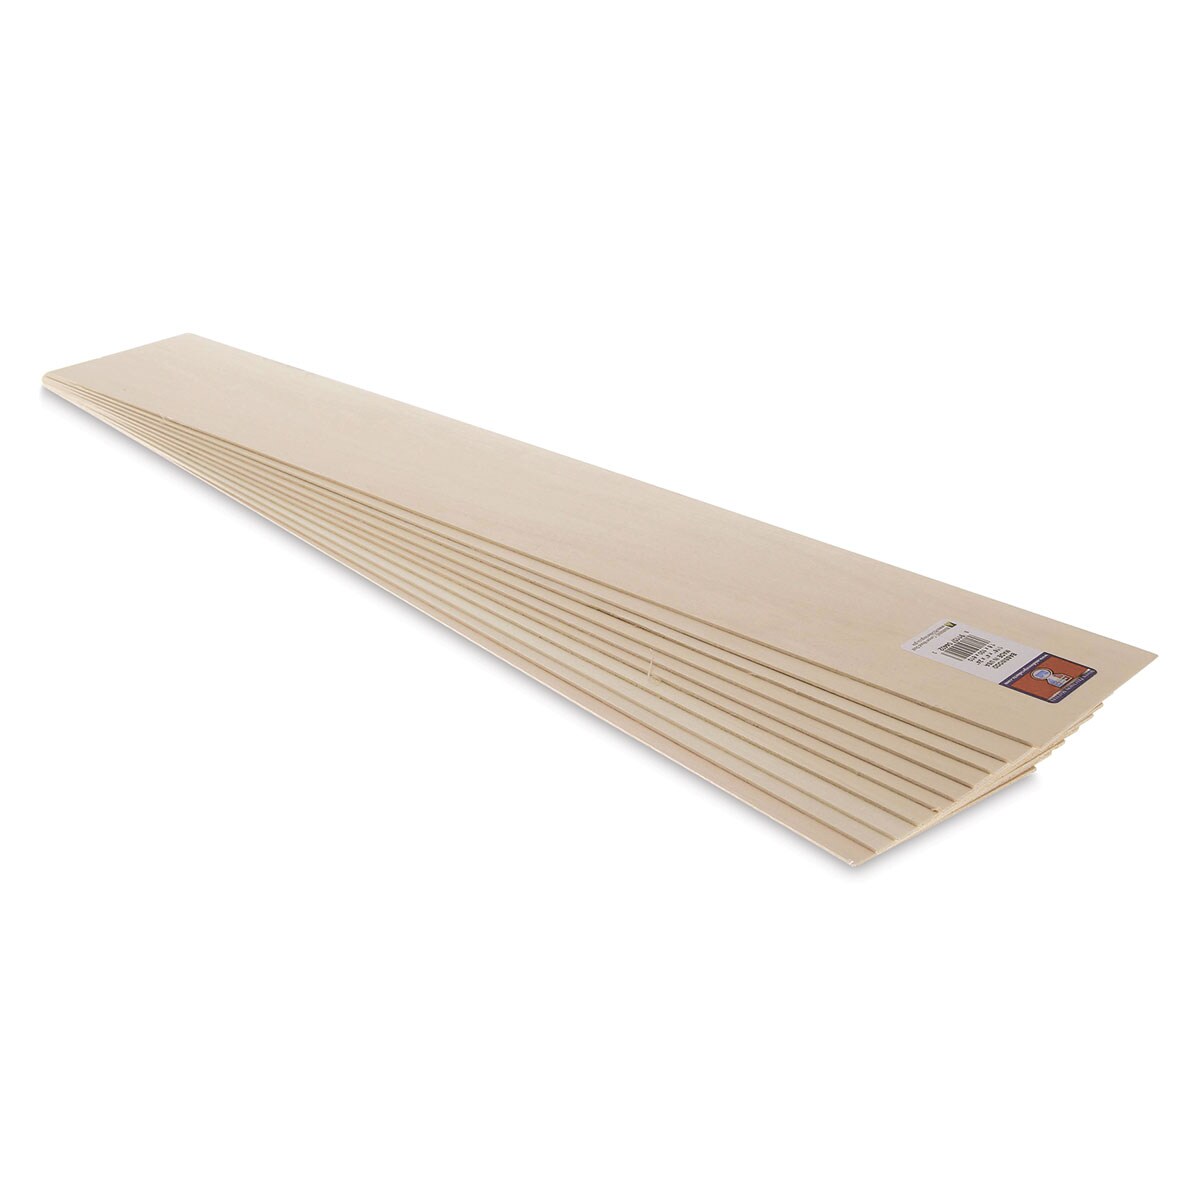 Midwest Products Basswood Sheets - 10 Pieces, 1/16 x 4 x 24